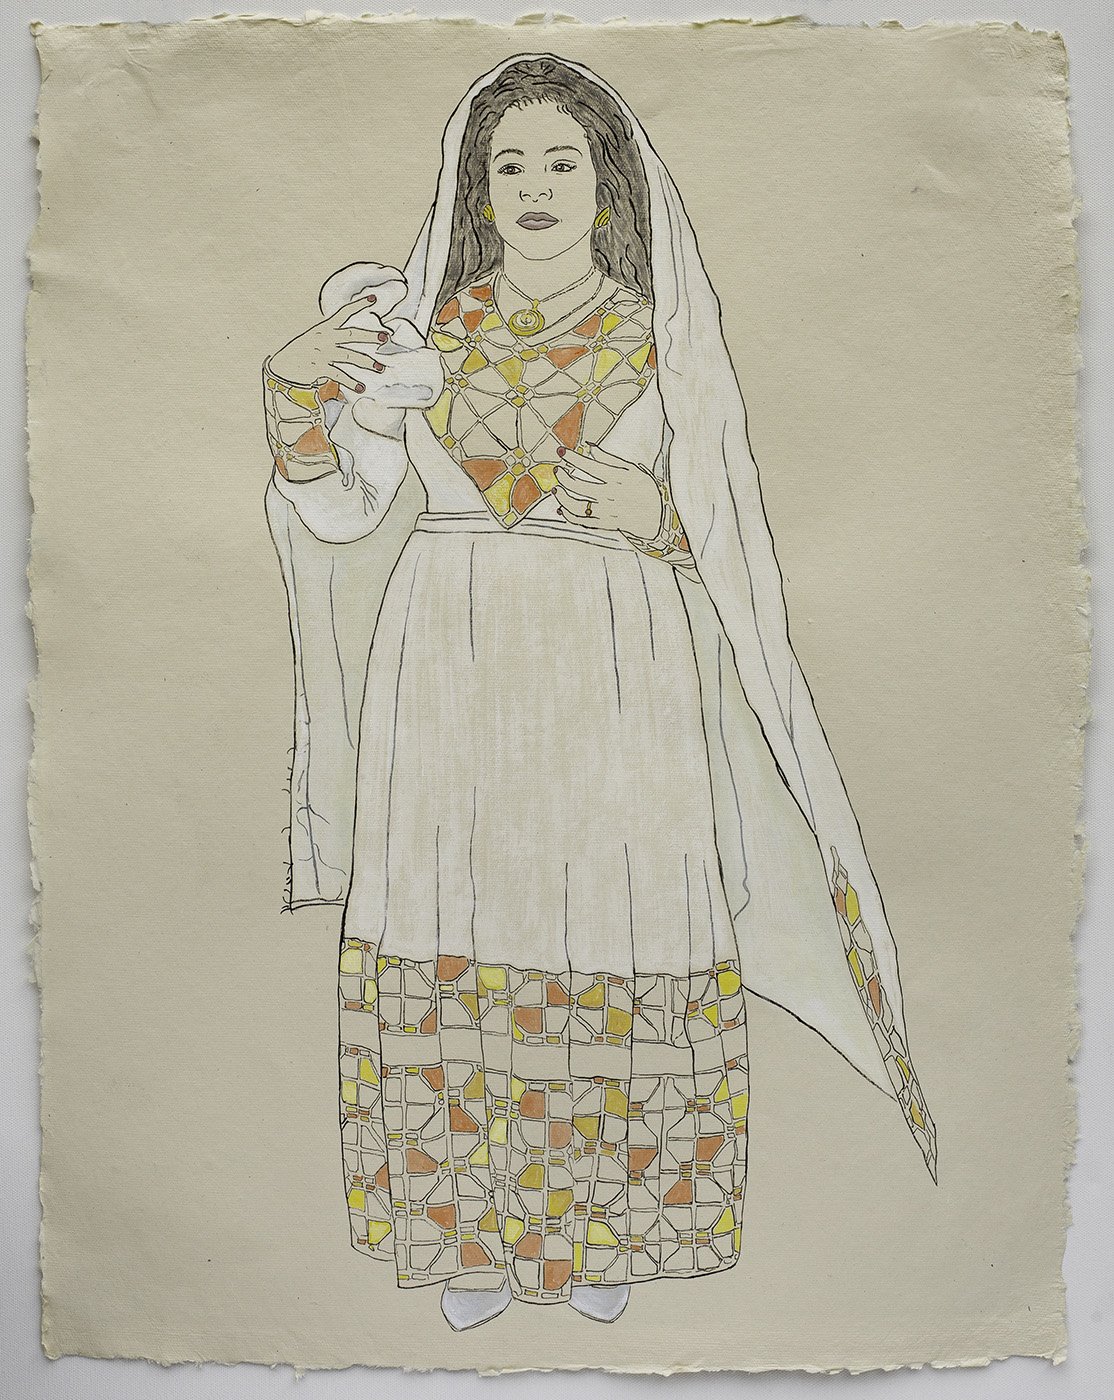   Available    Woman in Traditional Ethiopian Garb   2021, ink, watercolor, and gouache on handmade paper, 25” x 19” 